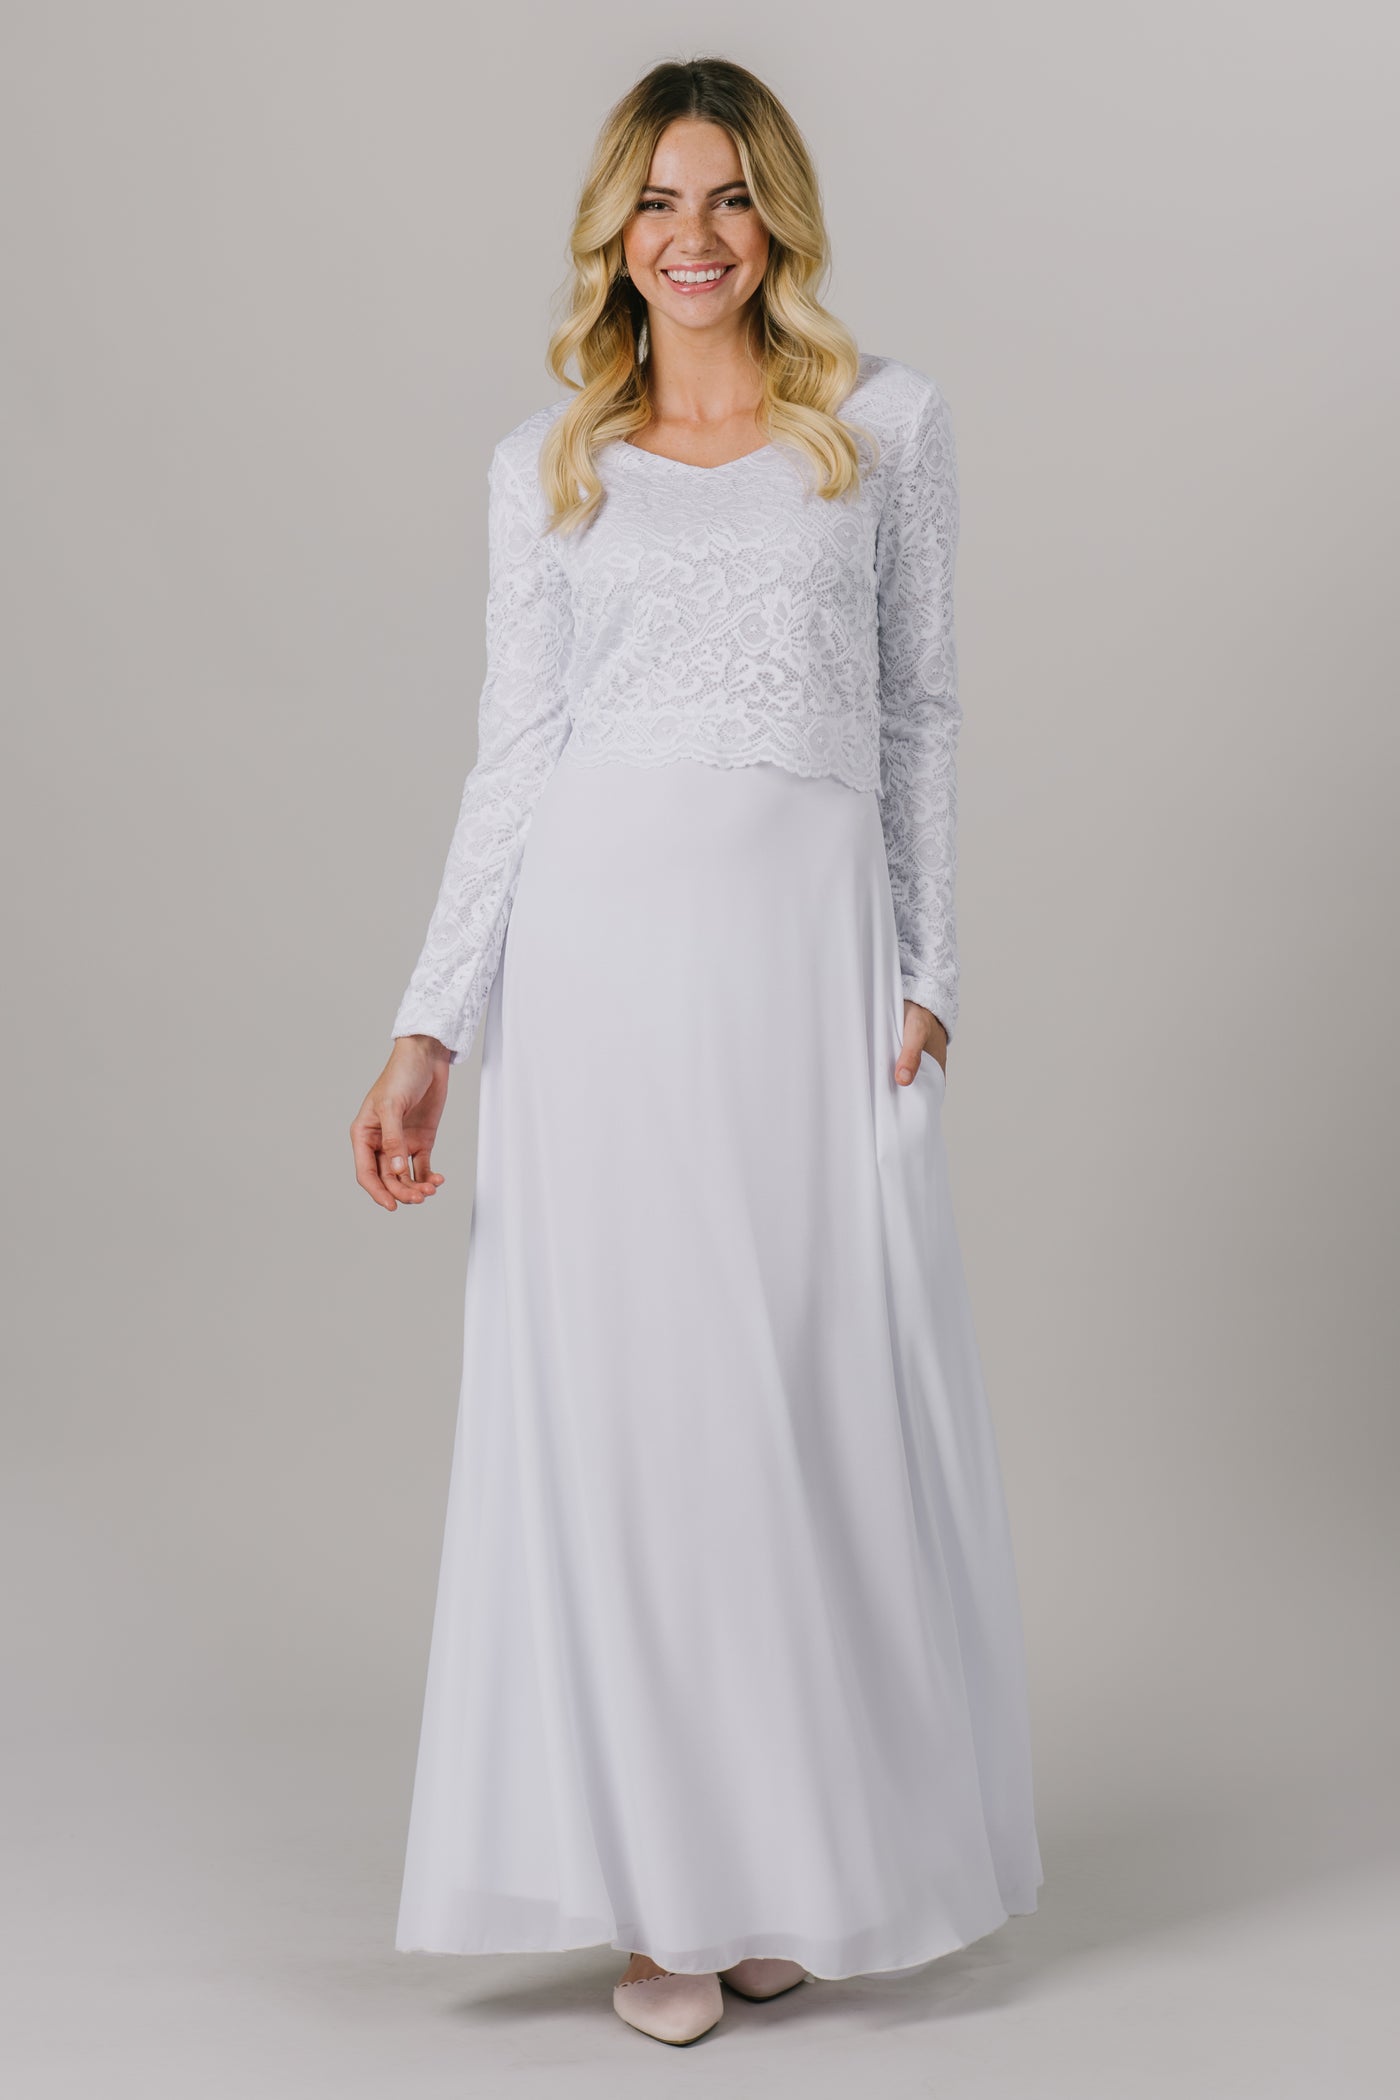 This LDS temple dress features a fully lined, loose lace bodice with a flattering waistband. It includes two pockets and a zipper close.